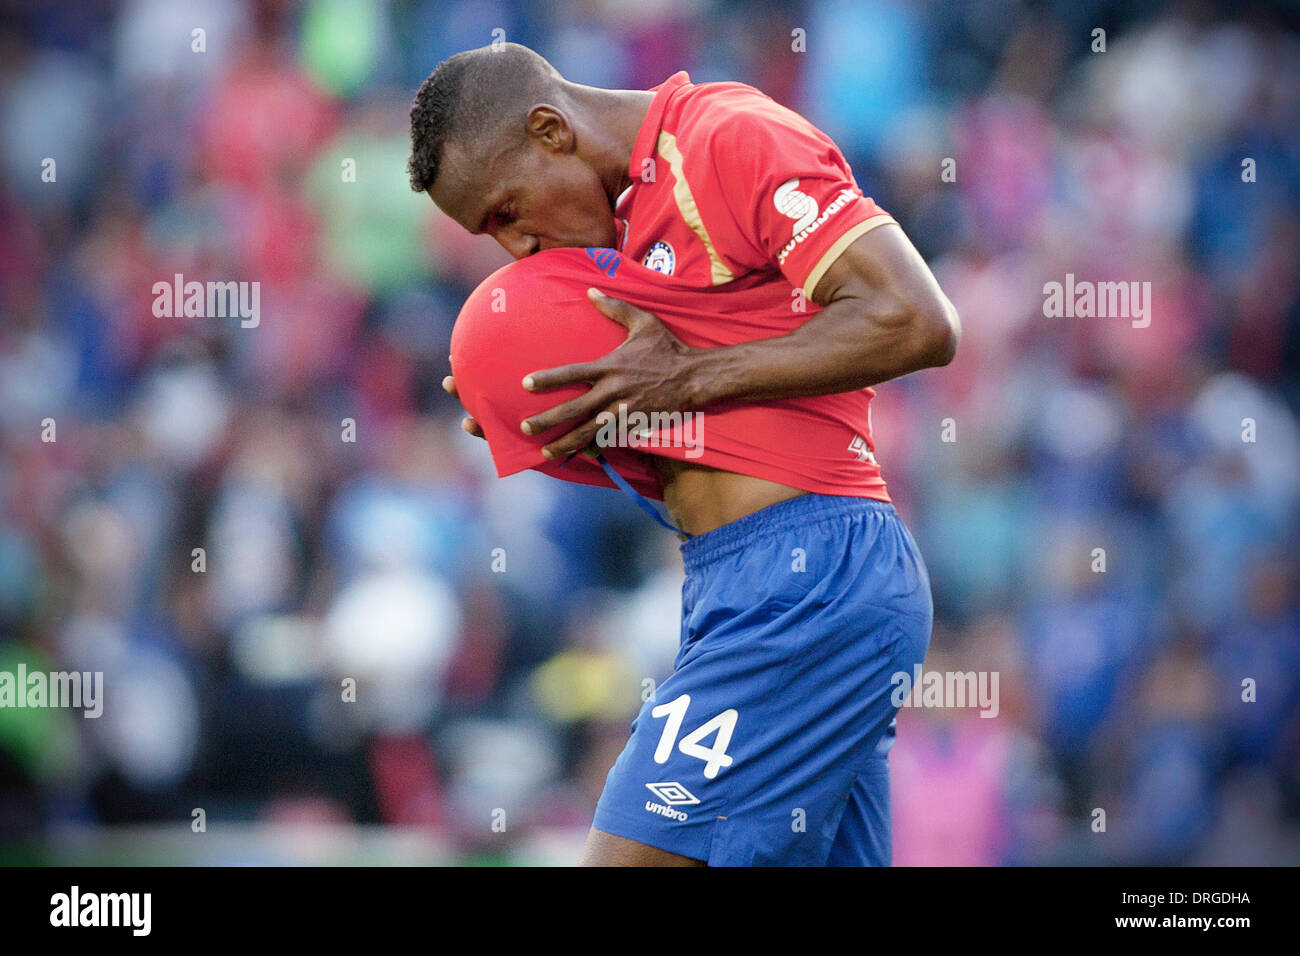 Mexico City, Mexico. 25th Jan, 2014. Amaranto Perea of Cruz Azul celebrates after scoring against Verazcruz during the match of the MX League Closing Tournament 2014, held in the Azul Stadium in Mexico City, capital of Mexico, on Jan. 25, 2014. Credit:  Alejandro Ayala/Xinhua/Alamy Live News Stock Photo